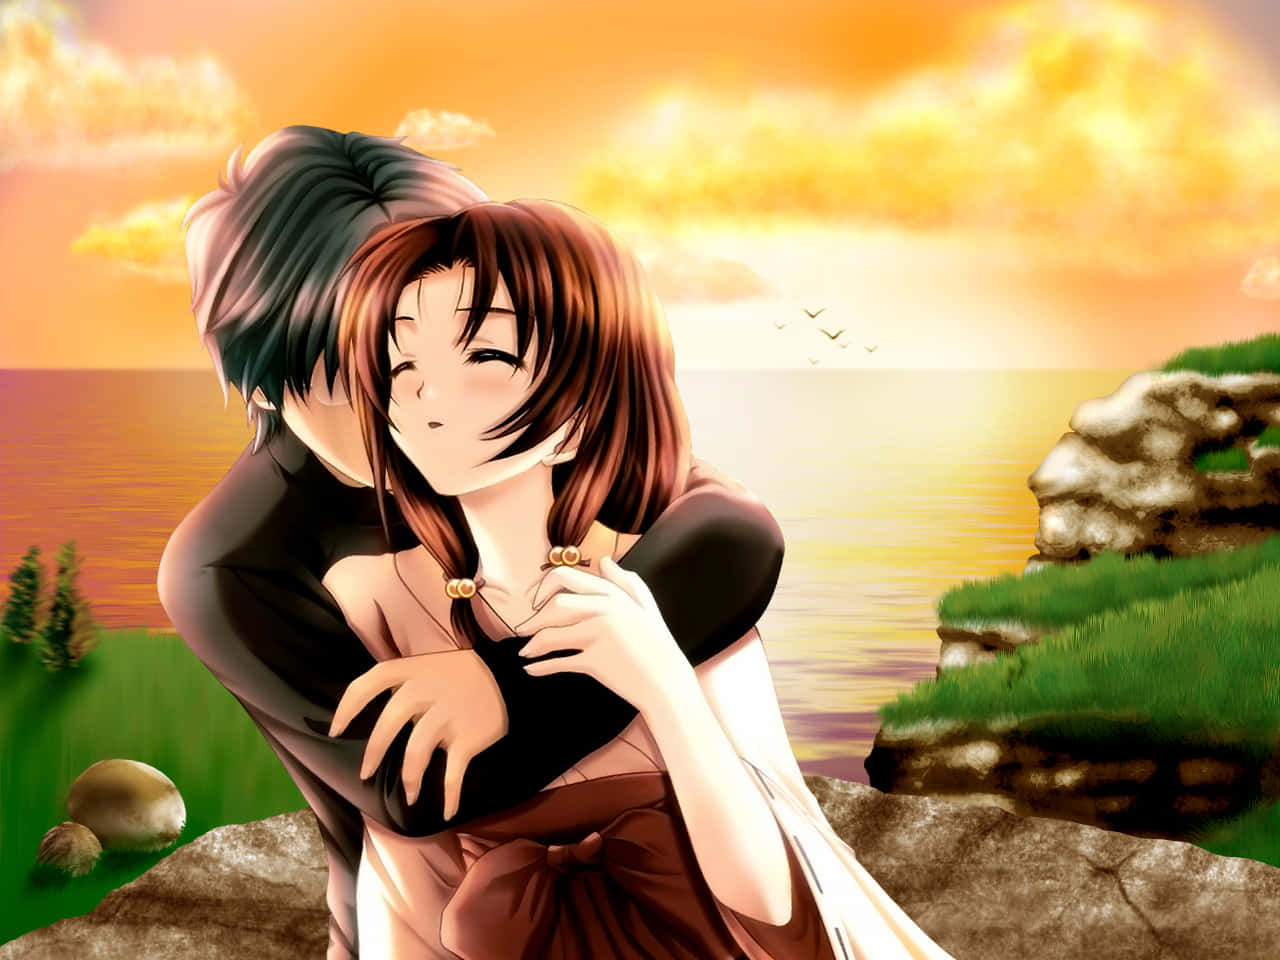 Cute couple together anime brown hair brown eyes kissing love on Craiyon